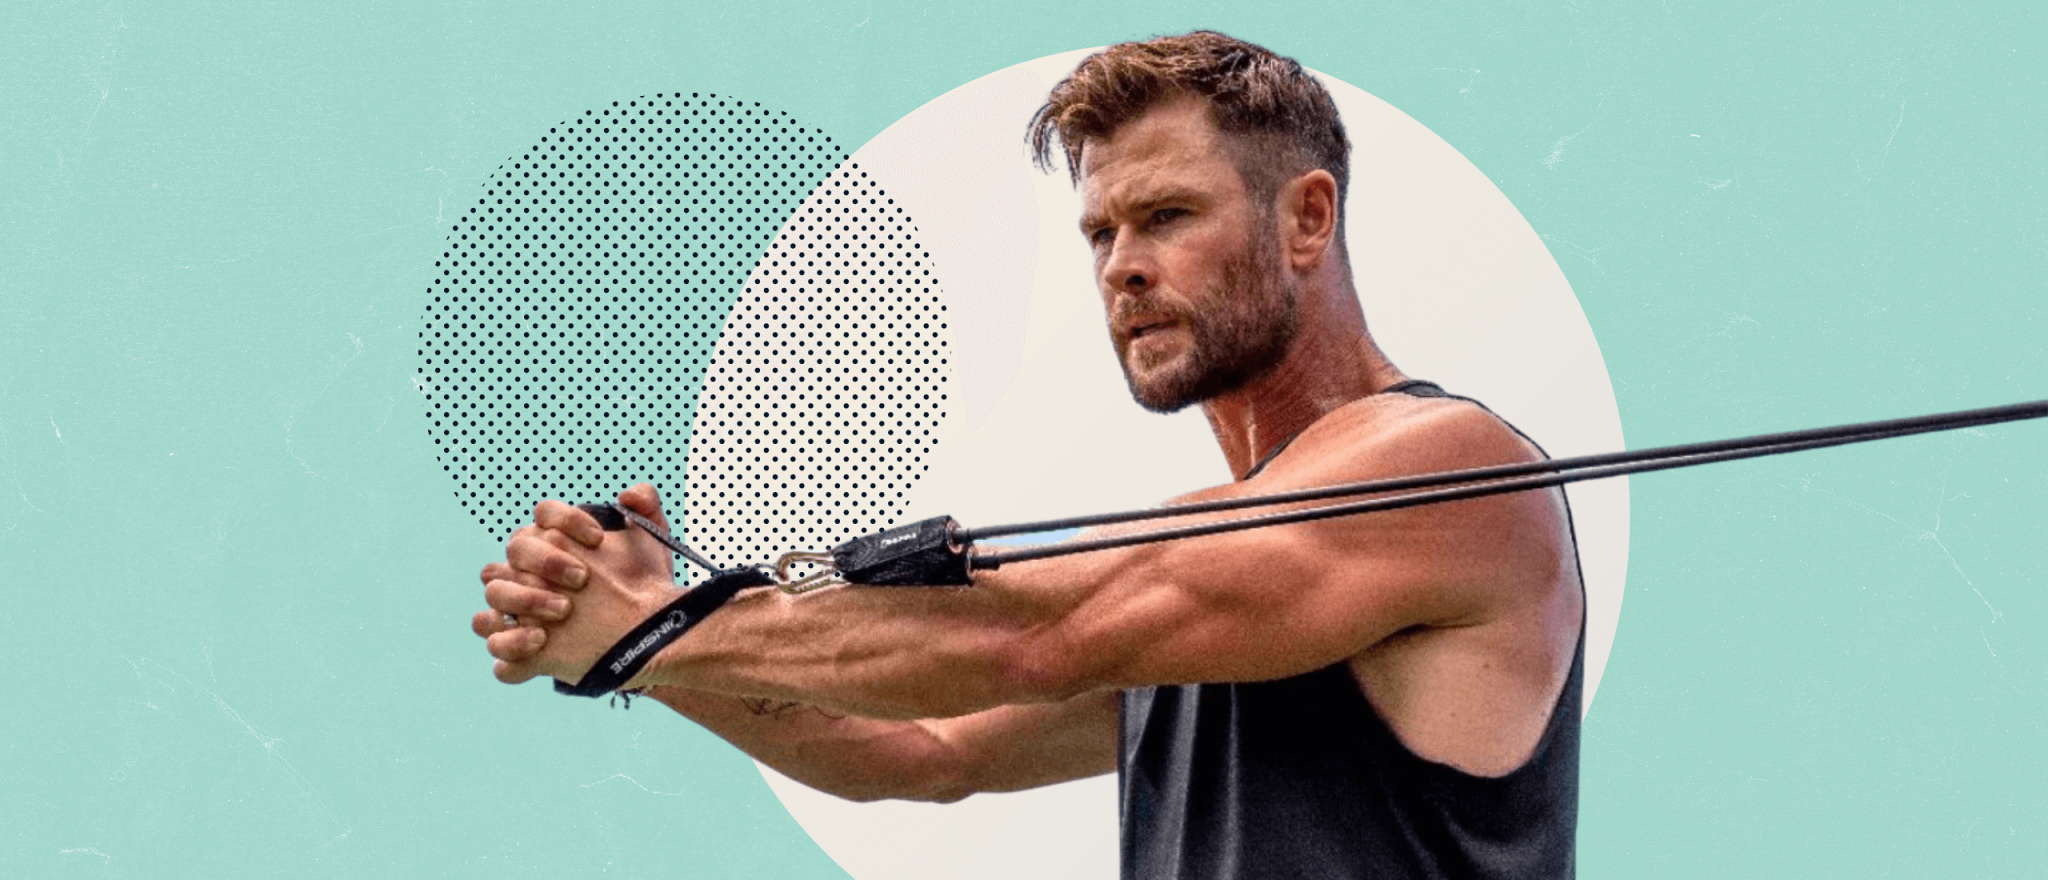 Steal Chris Hemsworth’s Functional Fitness Routine To Live Longer and Move Better